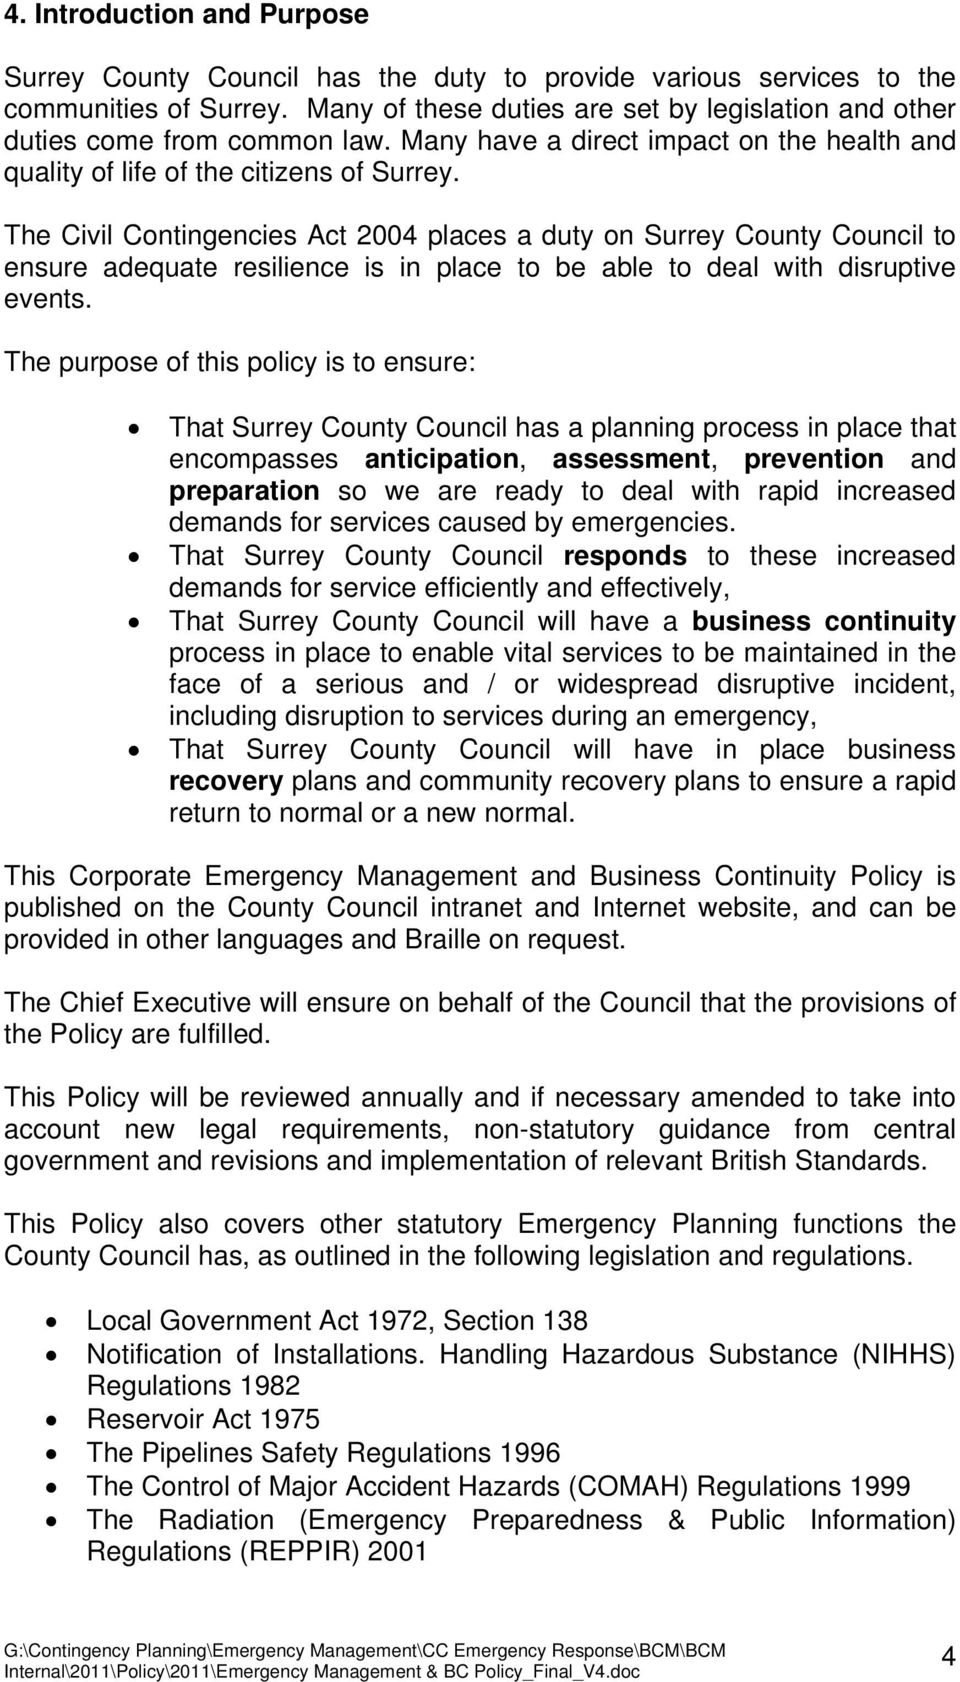 The Civil Contingencies Act 2004 places a duty on Surrey County Council to ensure adequate resilience is in place to be able to deal with disruptive events.